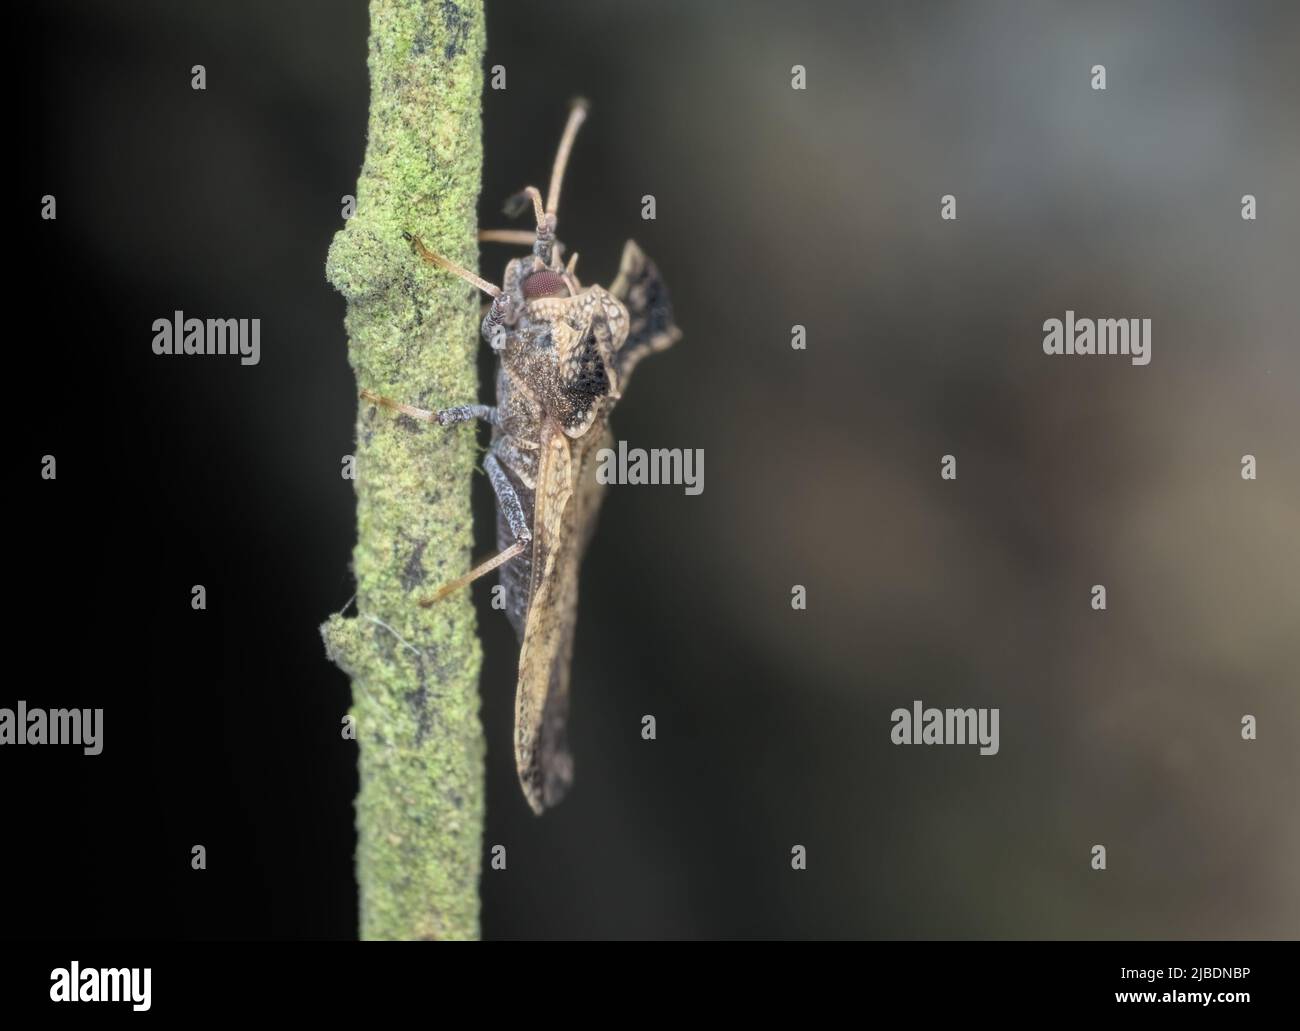 Lace bugs perched on the branch from side view Stock Photo